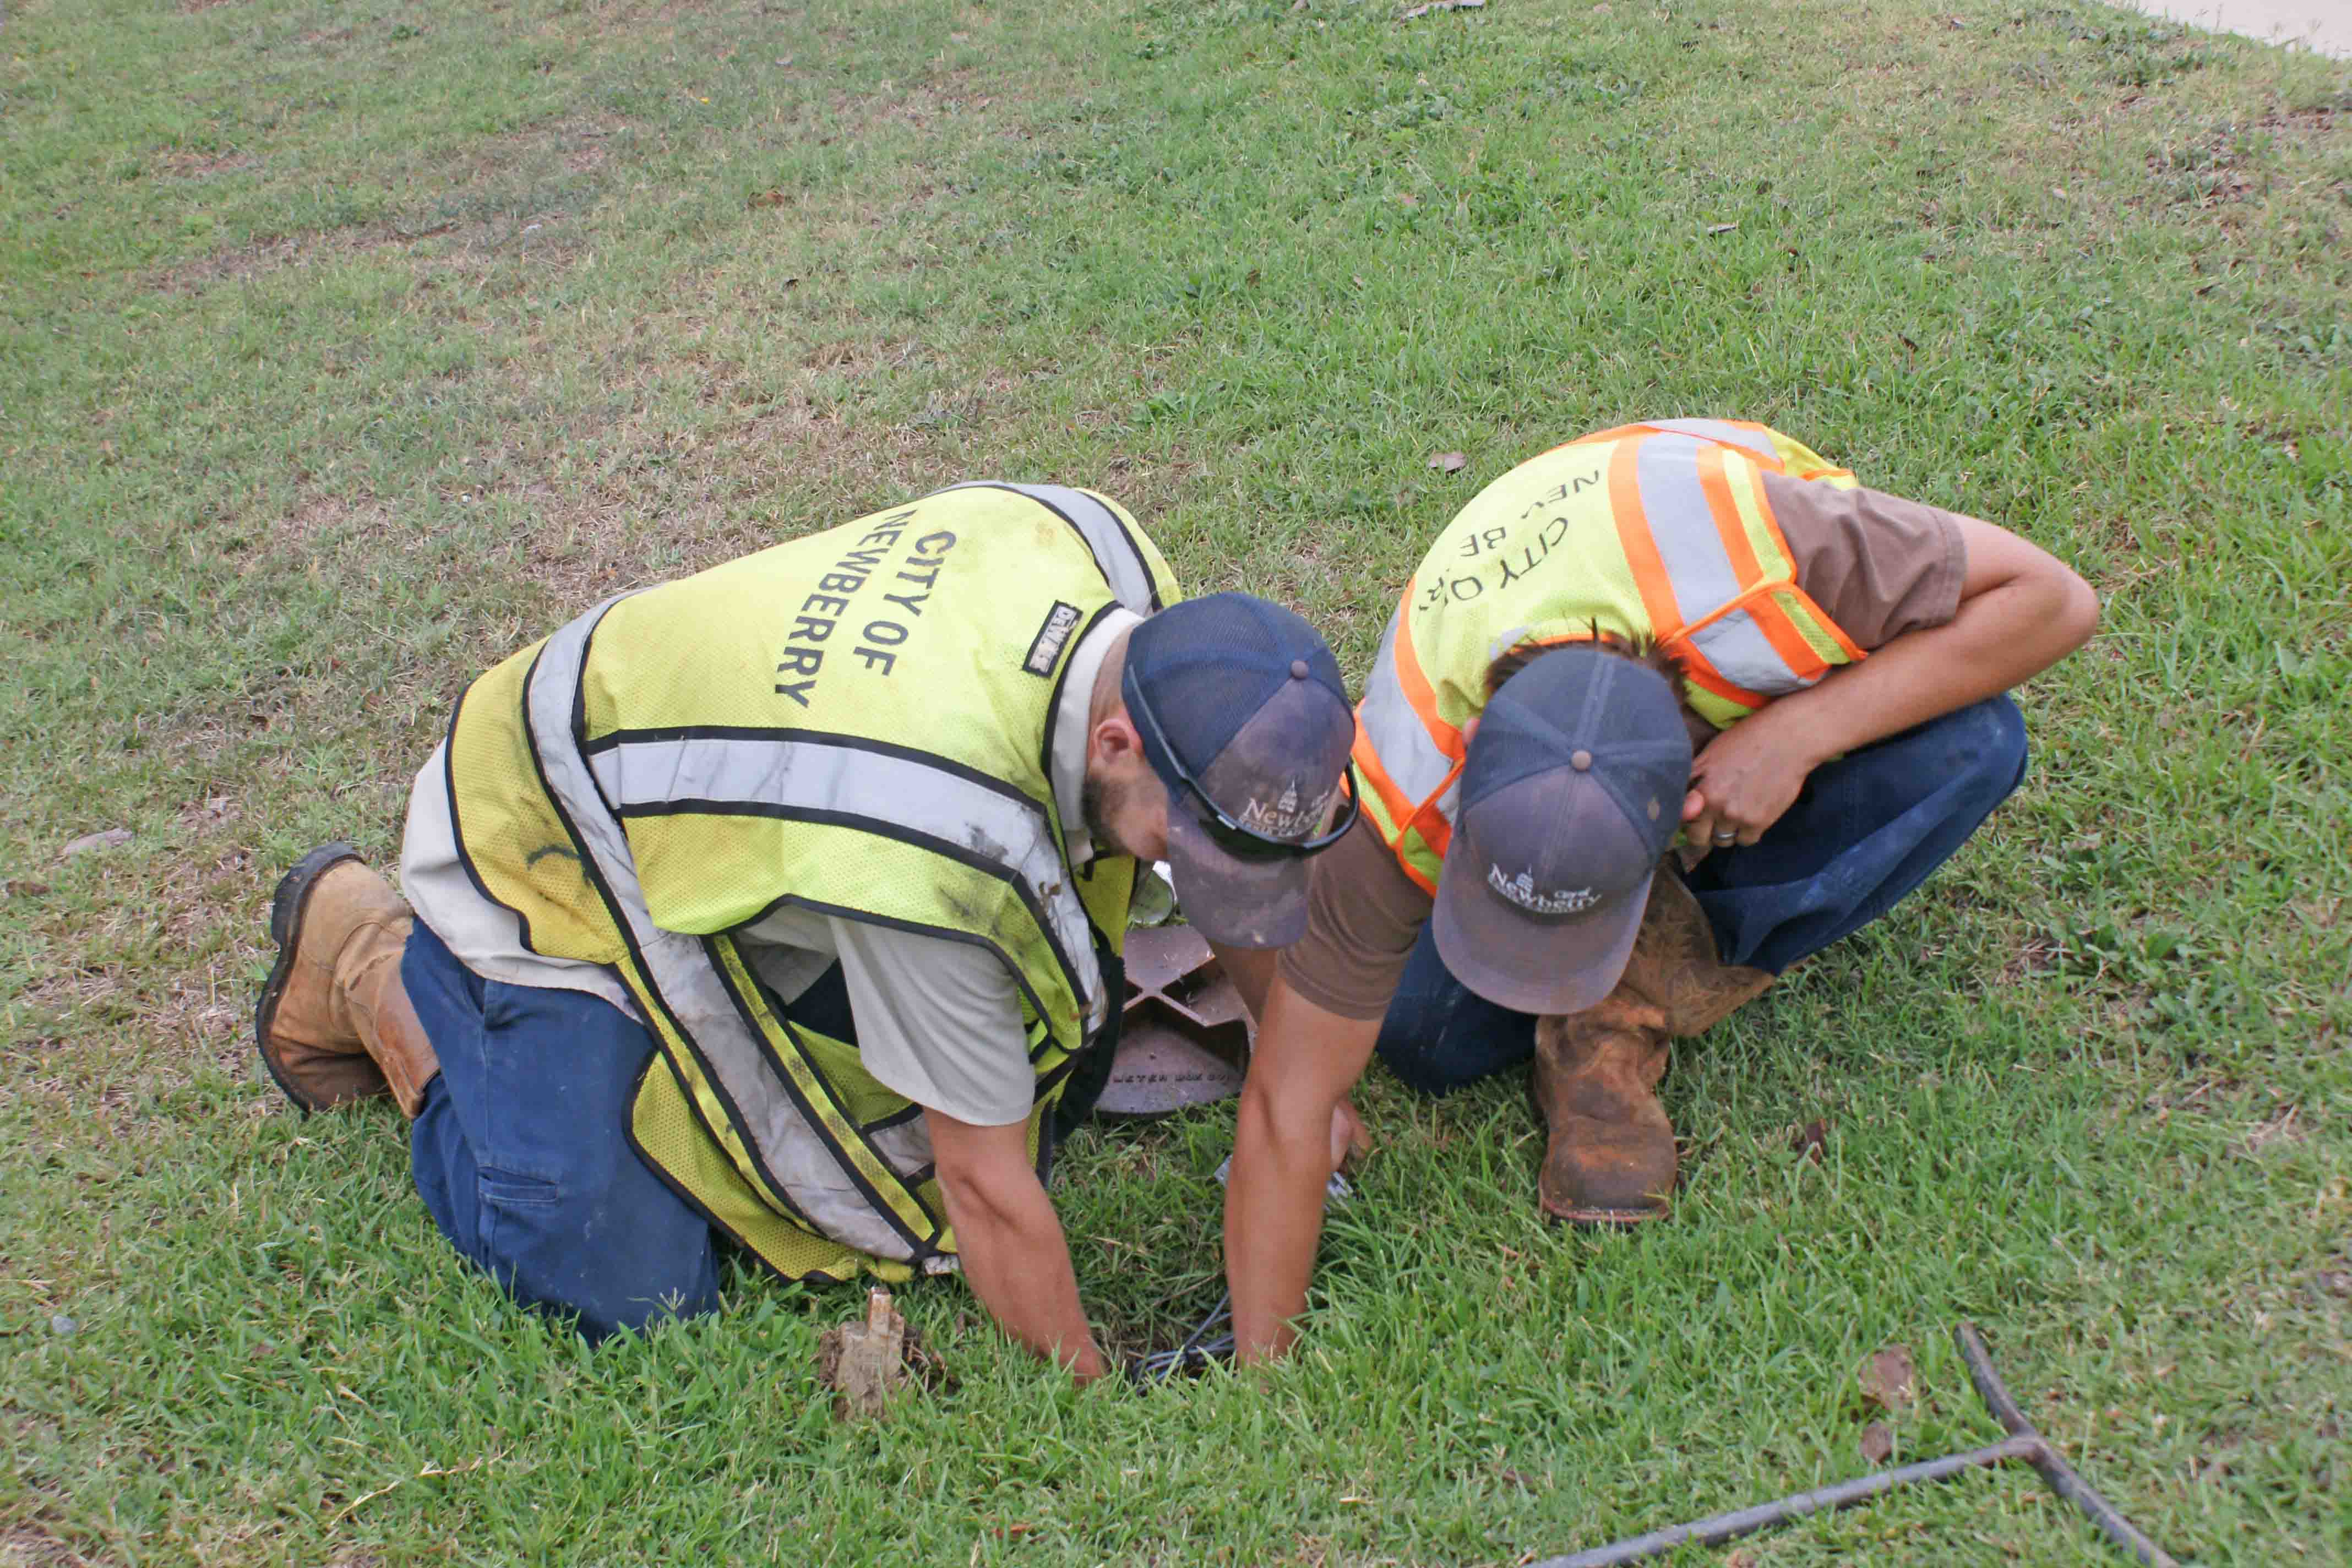 City of Newberry sewer employees changing out a water meter